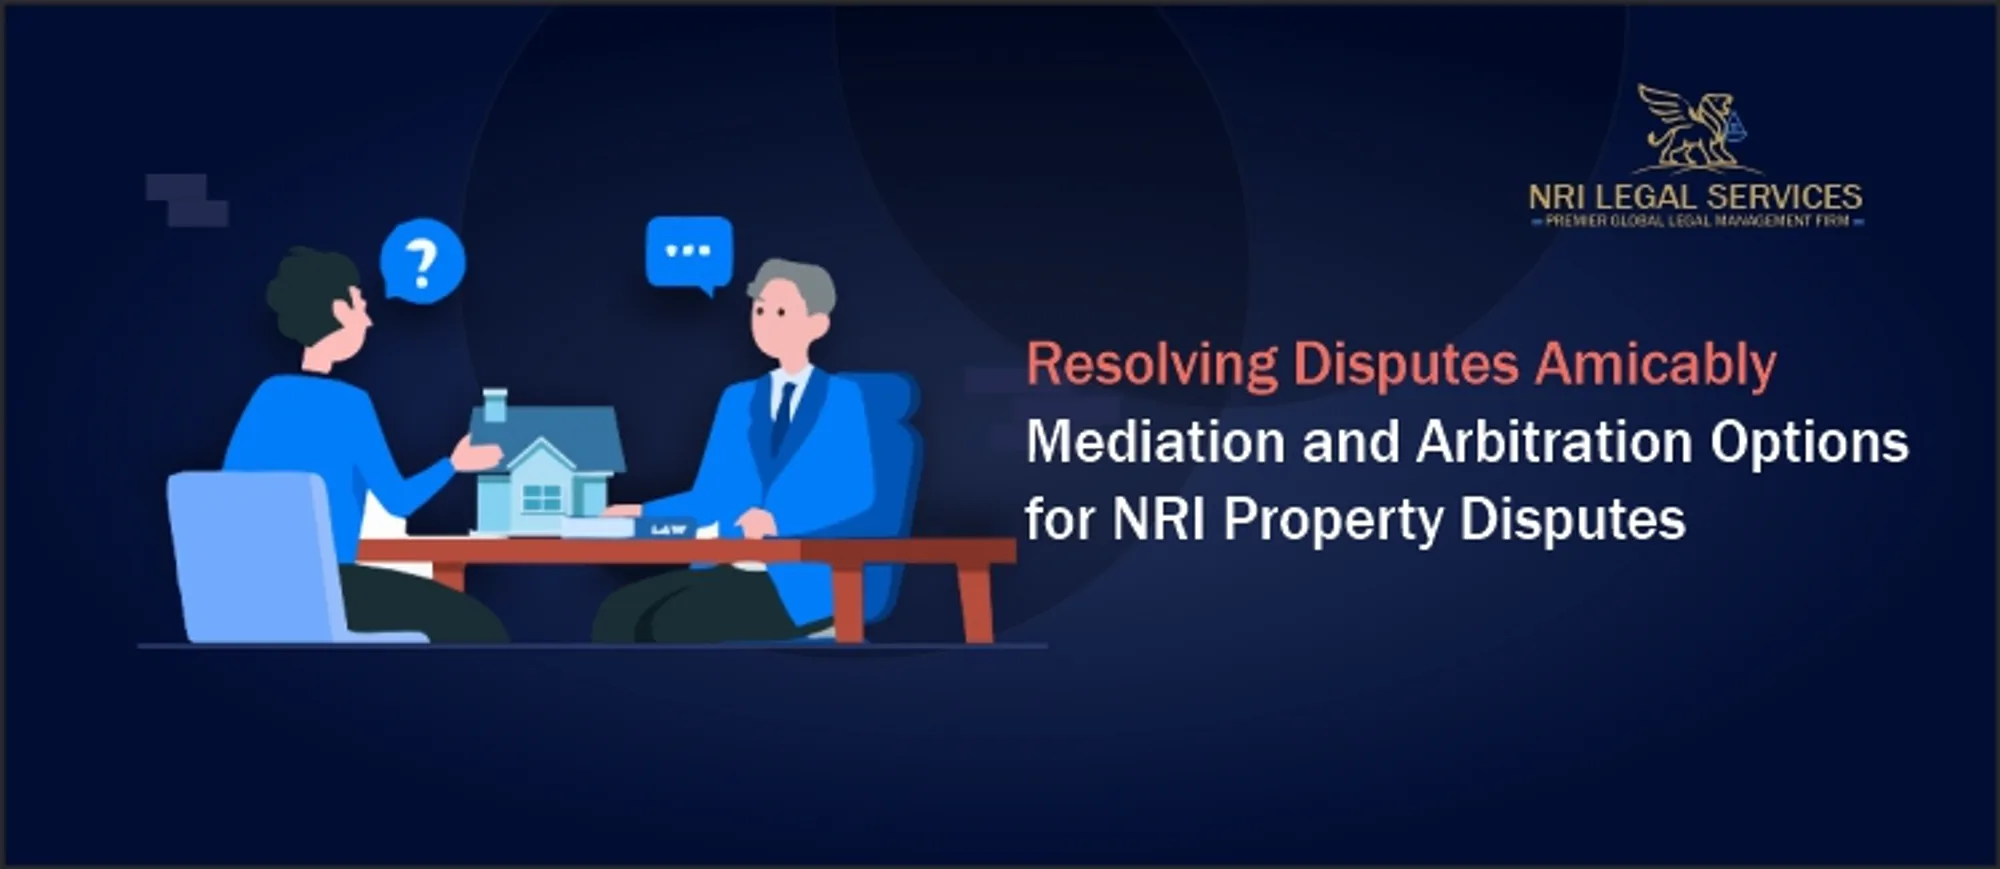 NRI Property Disputes Resolving Disputes Amicably Mediation and Arbitration Options